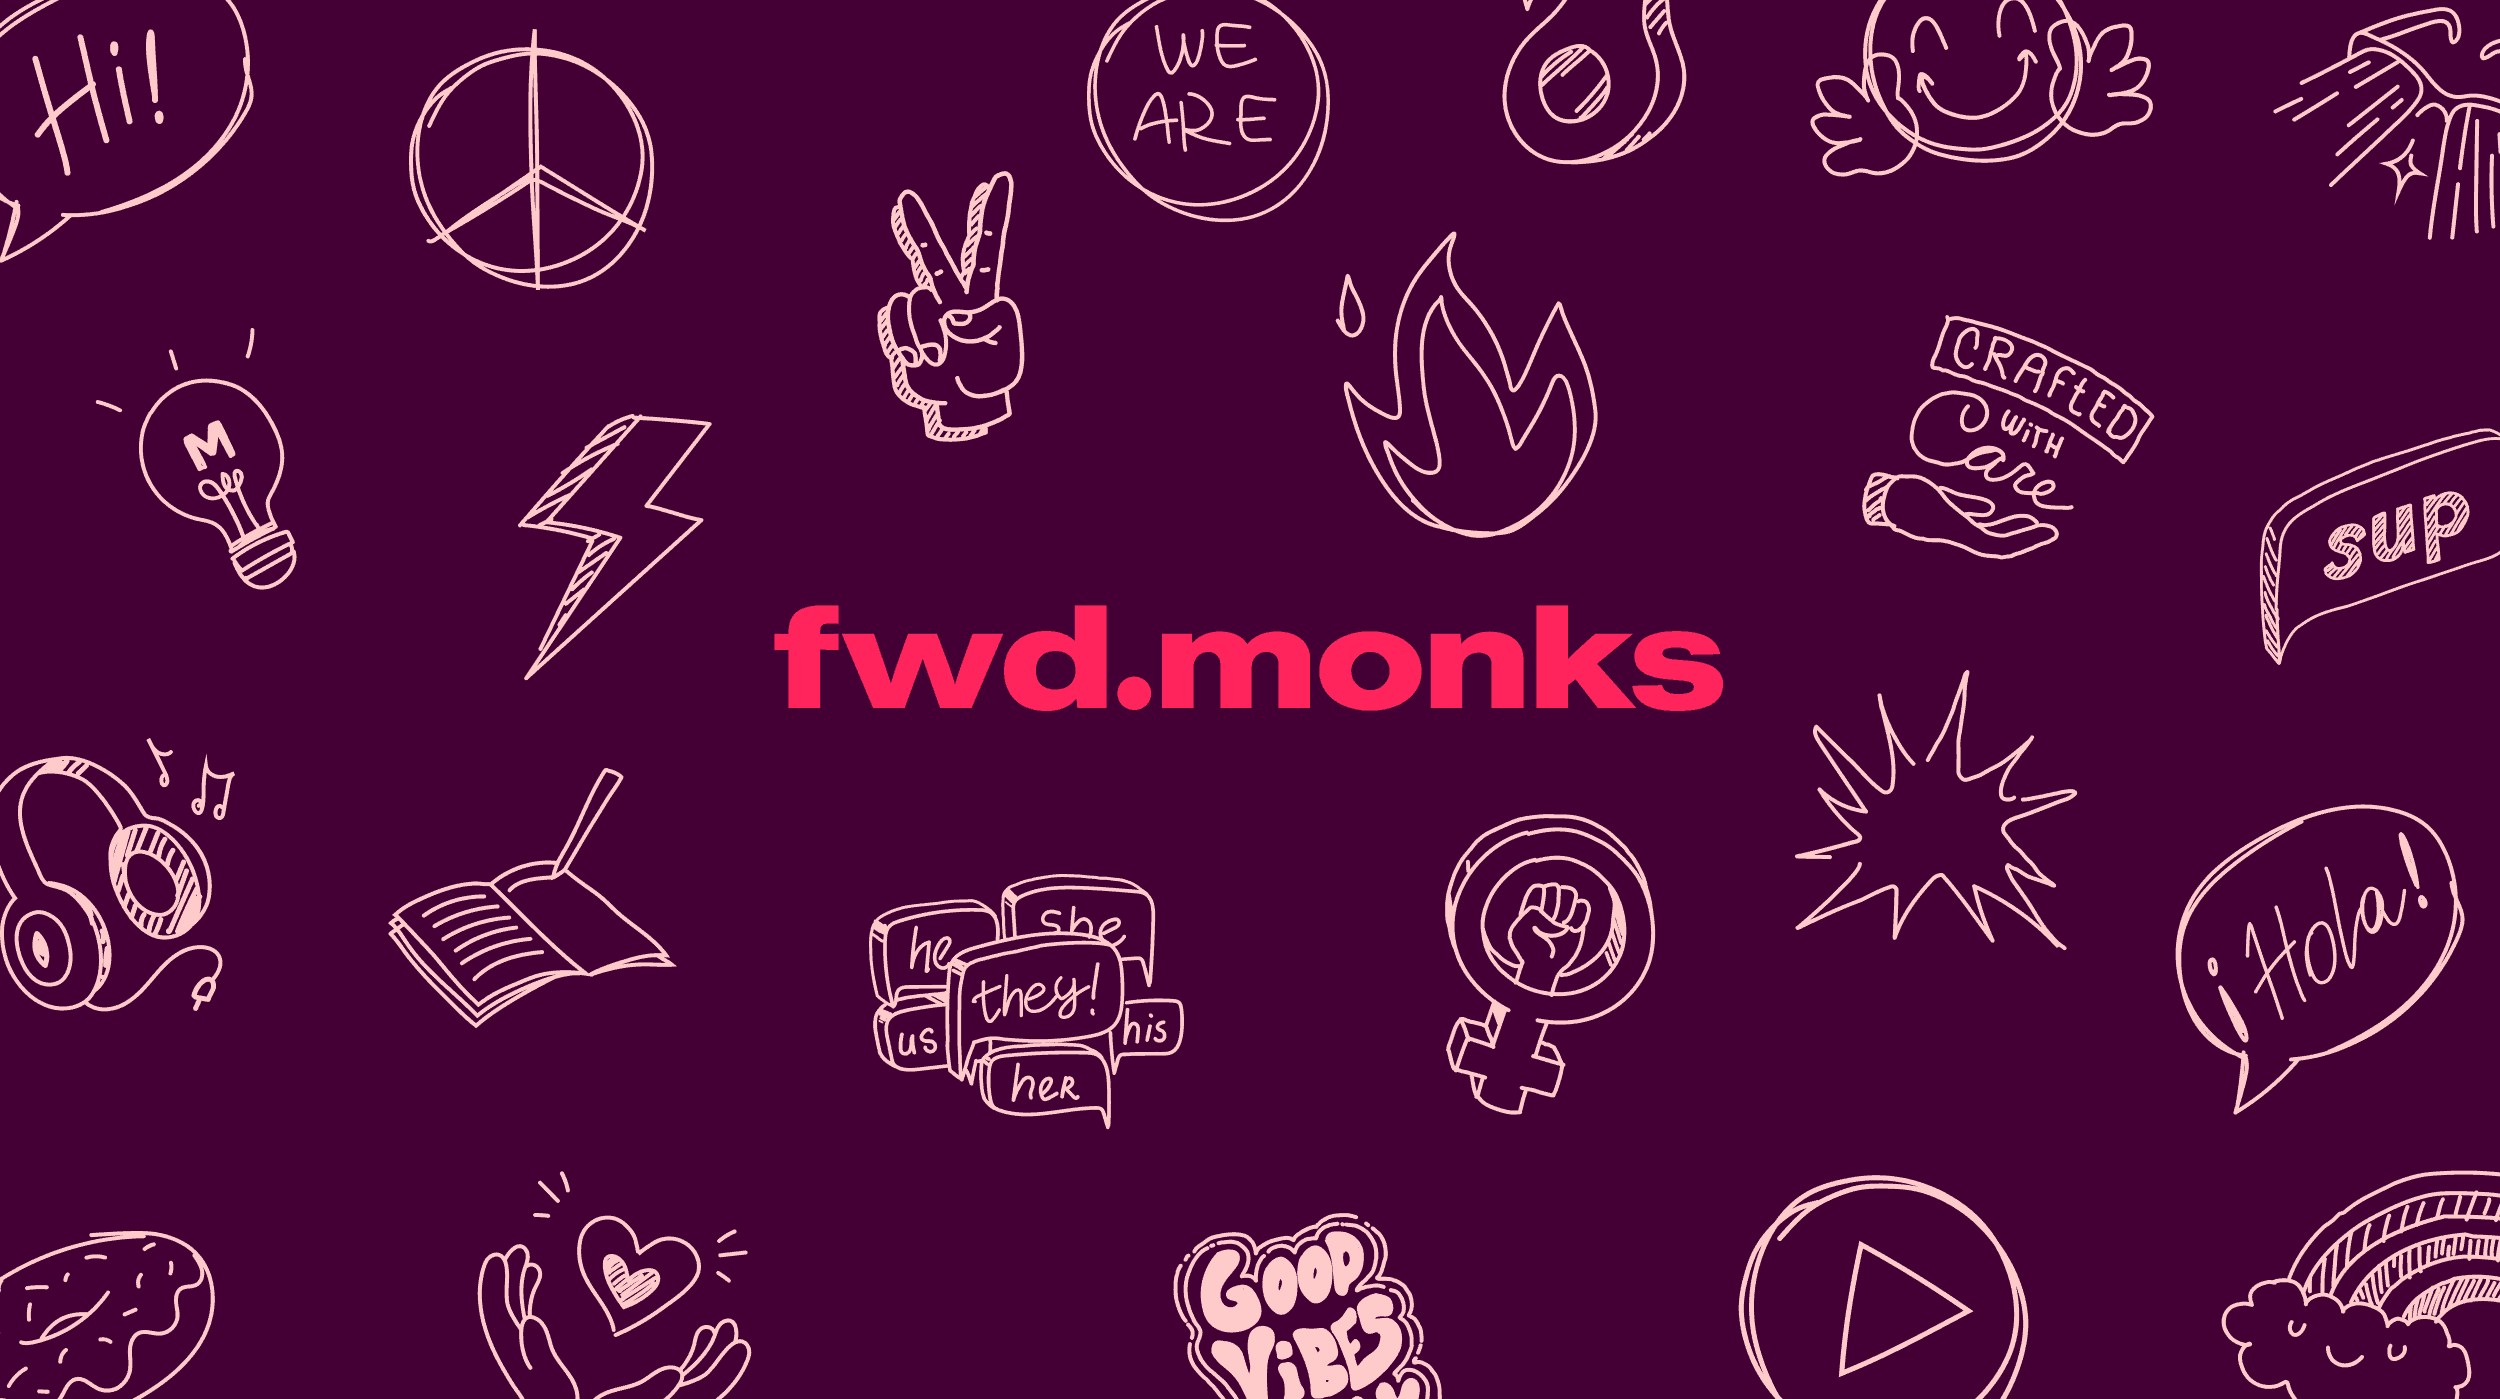 Firewood monks logo with a bunch of scribbles around it